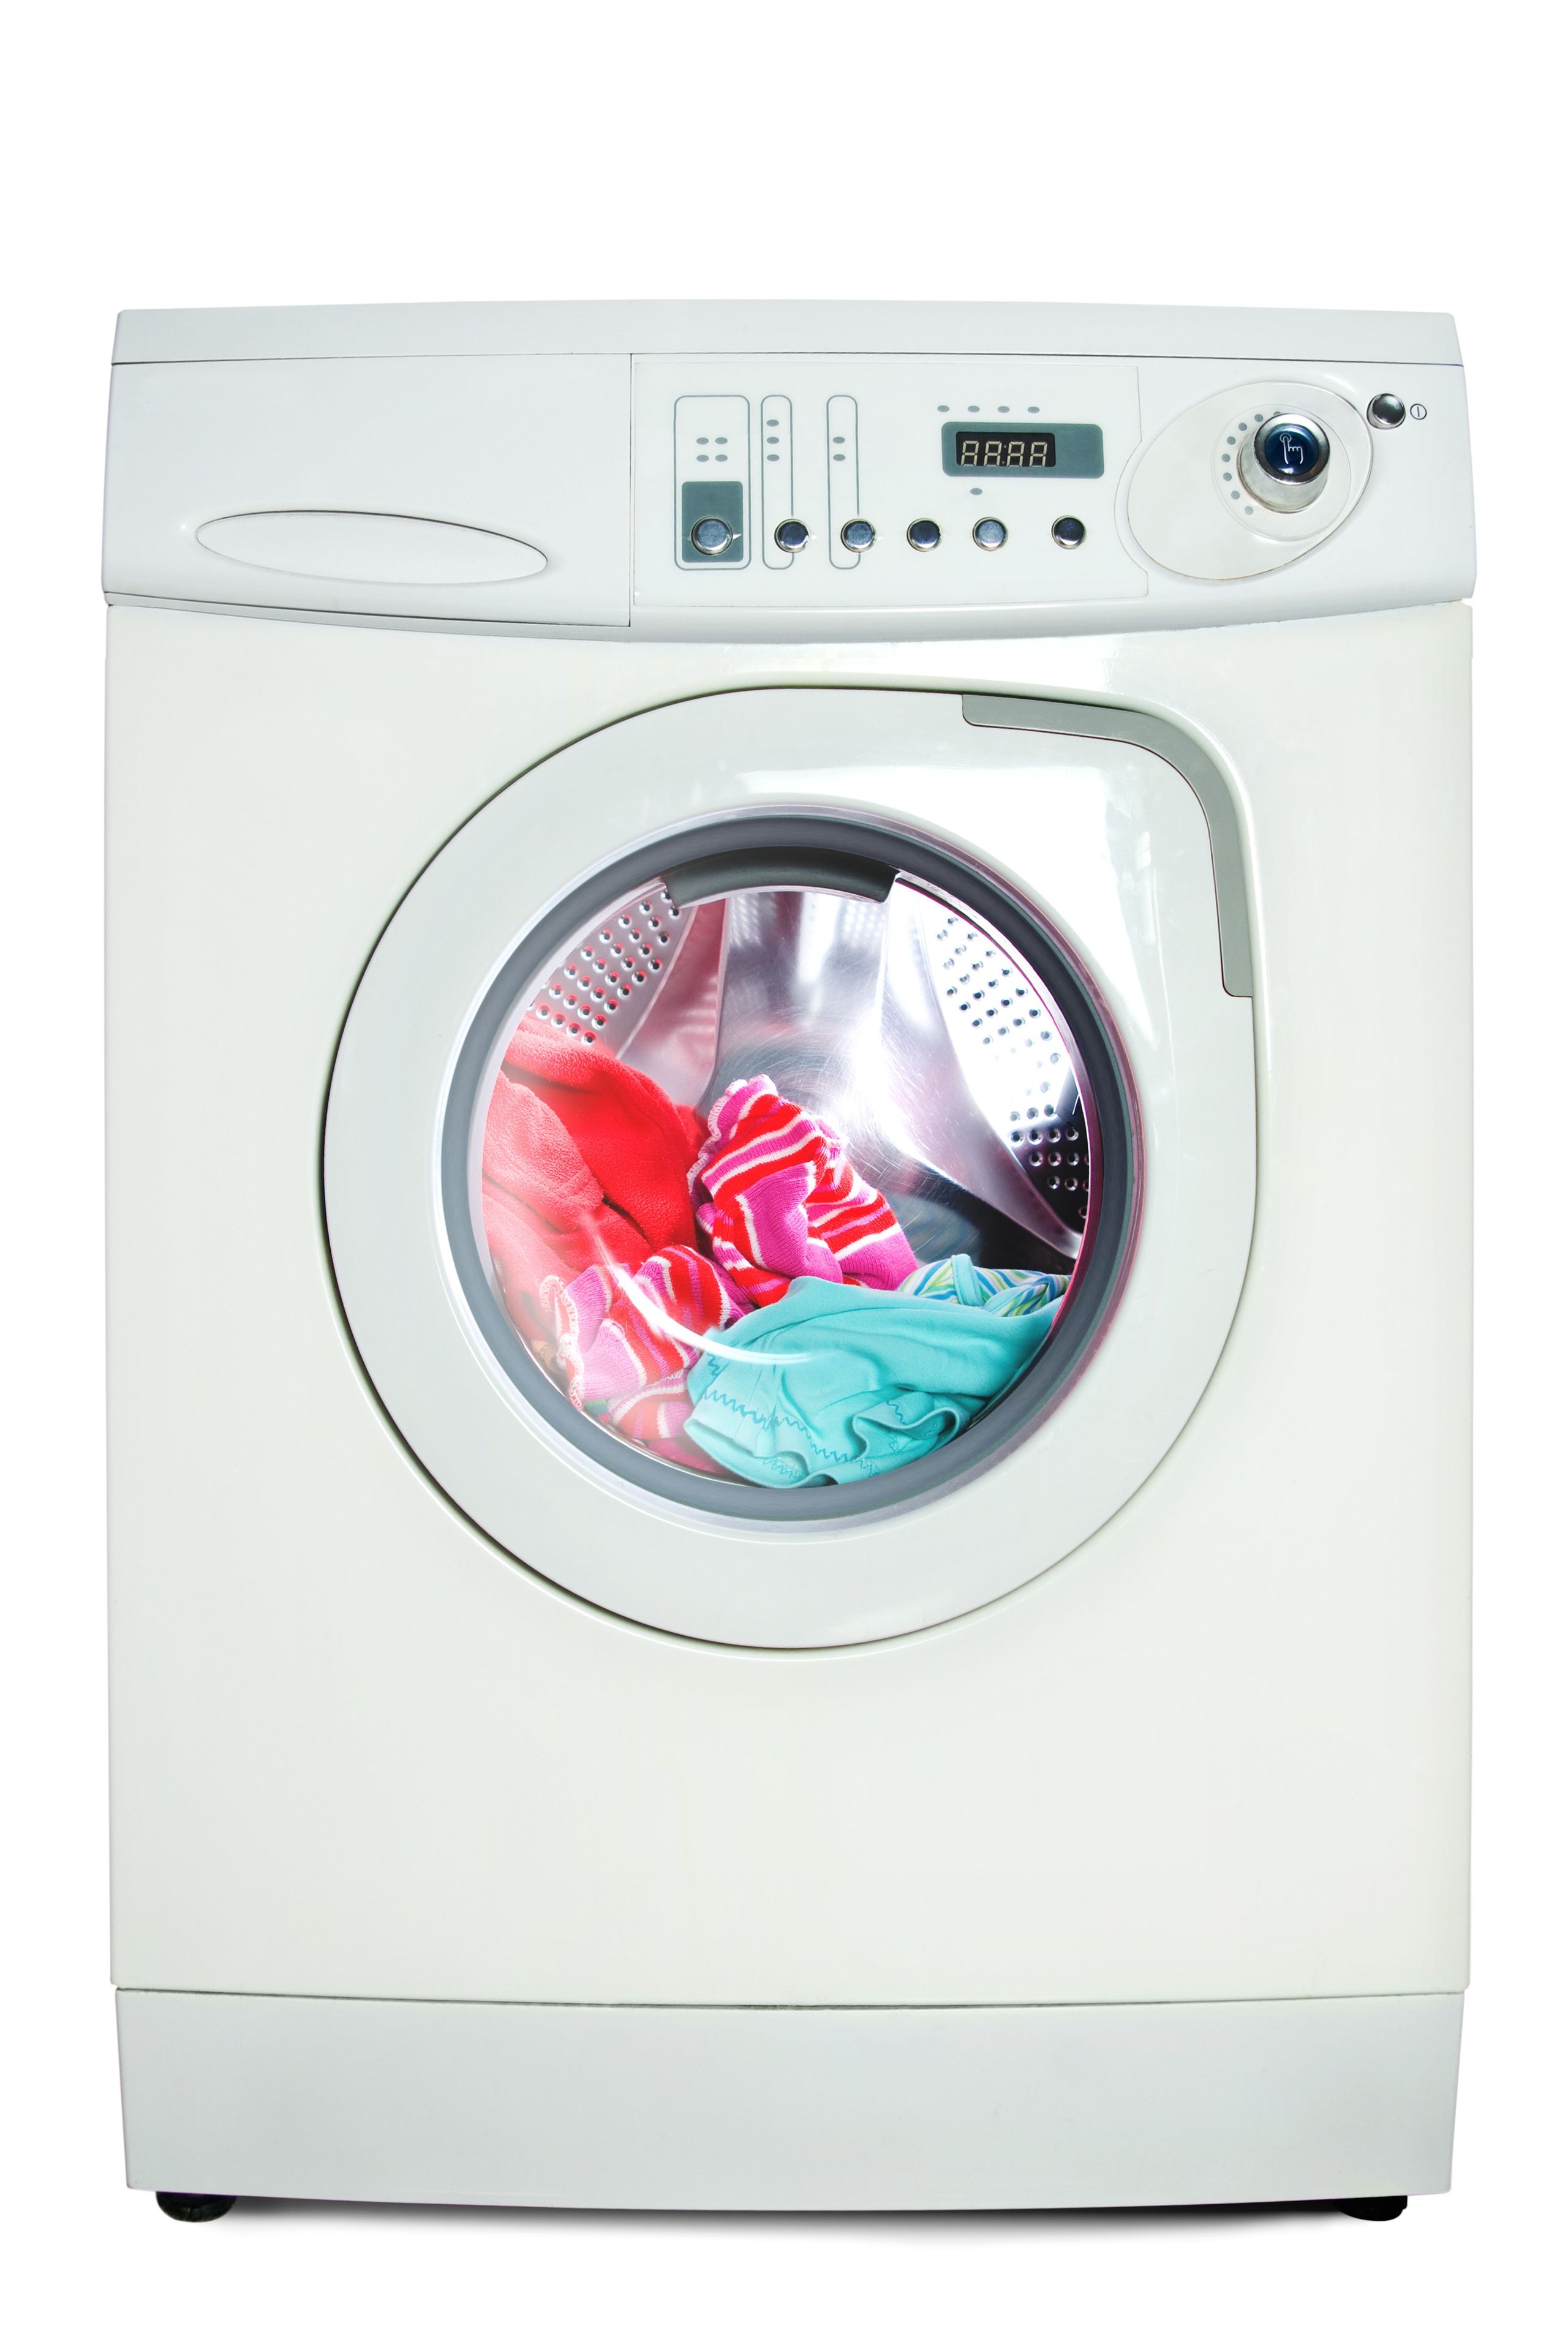 Peruse The Best Washing Machines in Louisville At a Lauded Appliance Shop